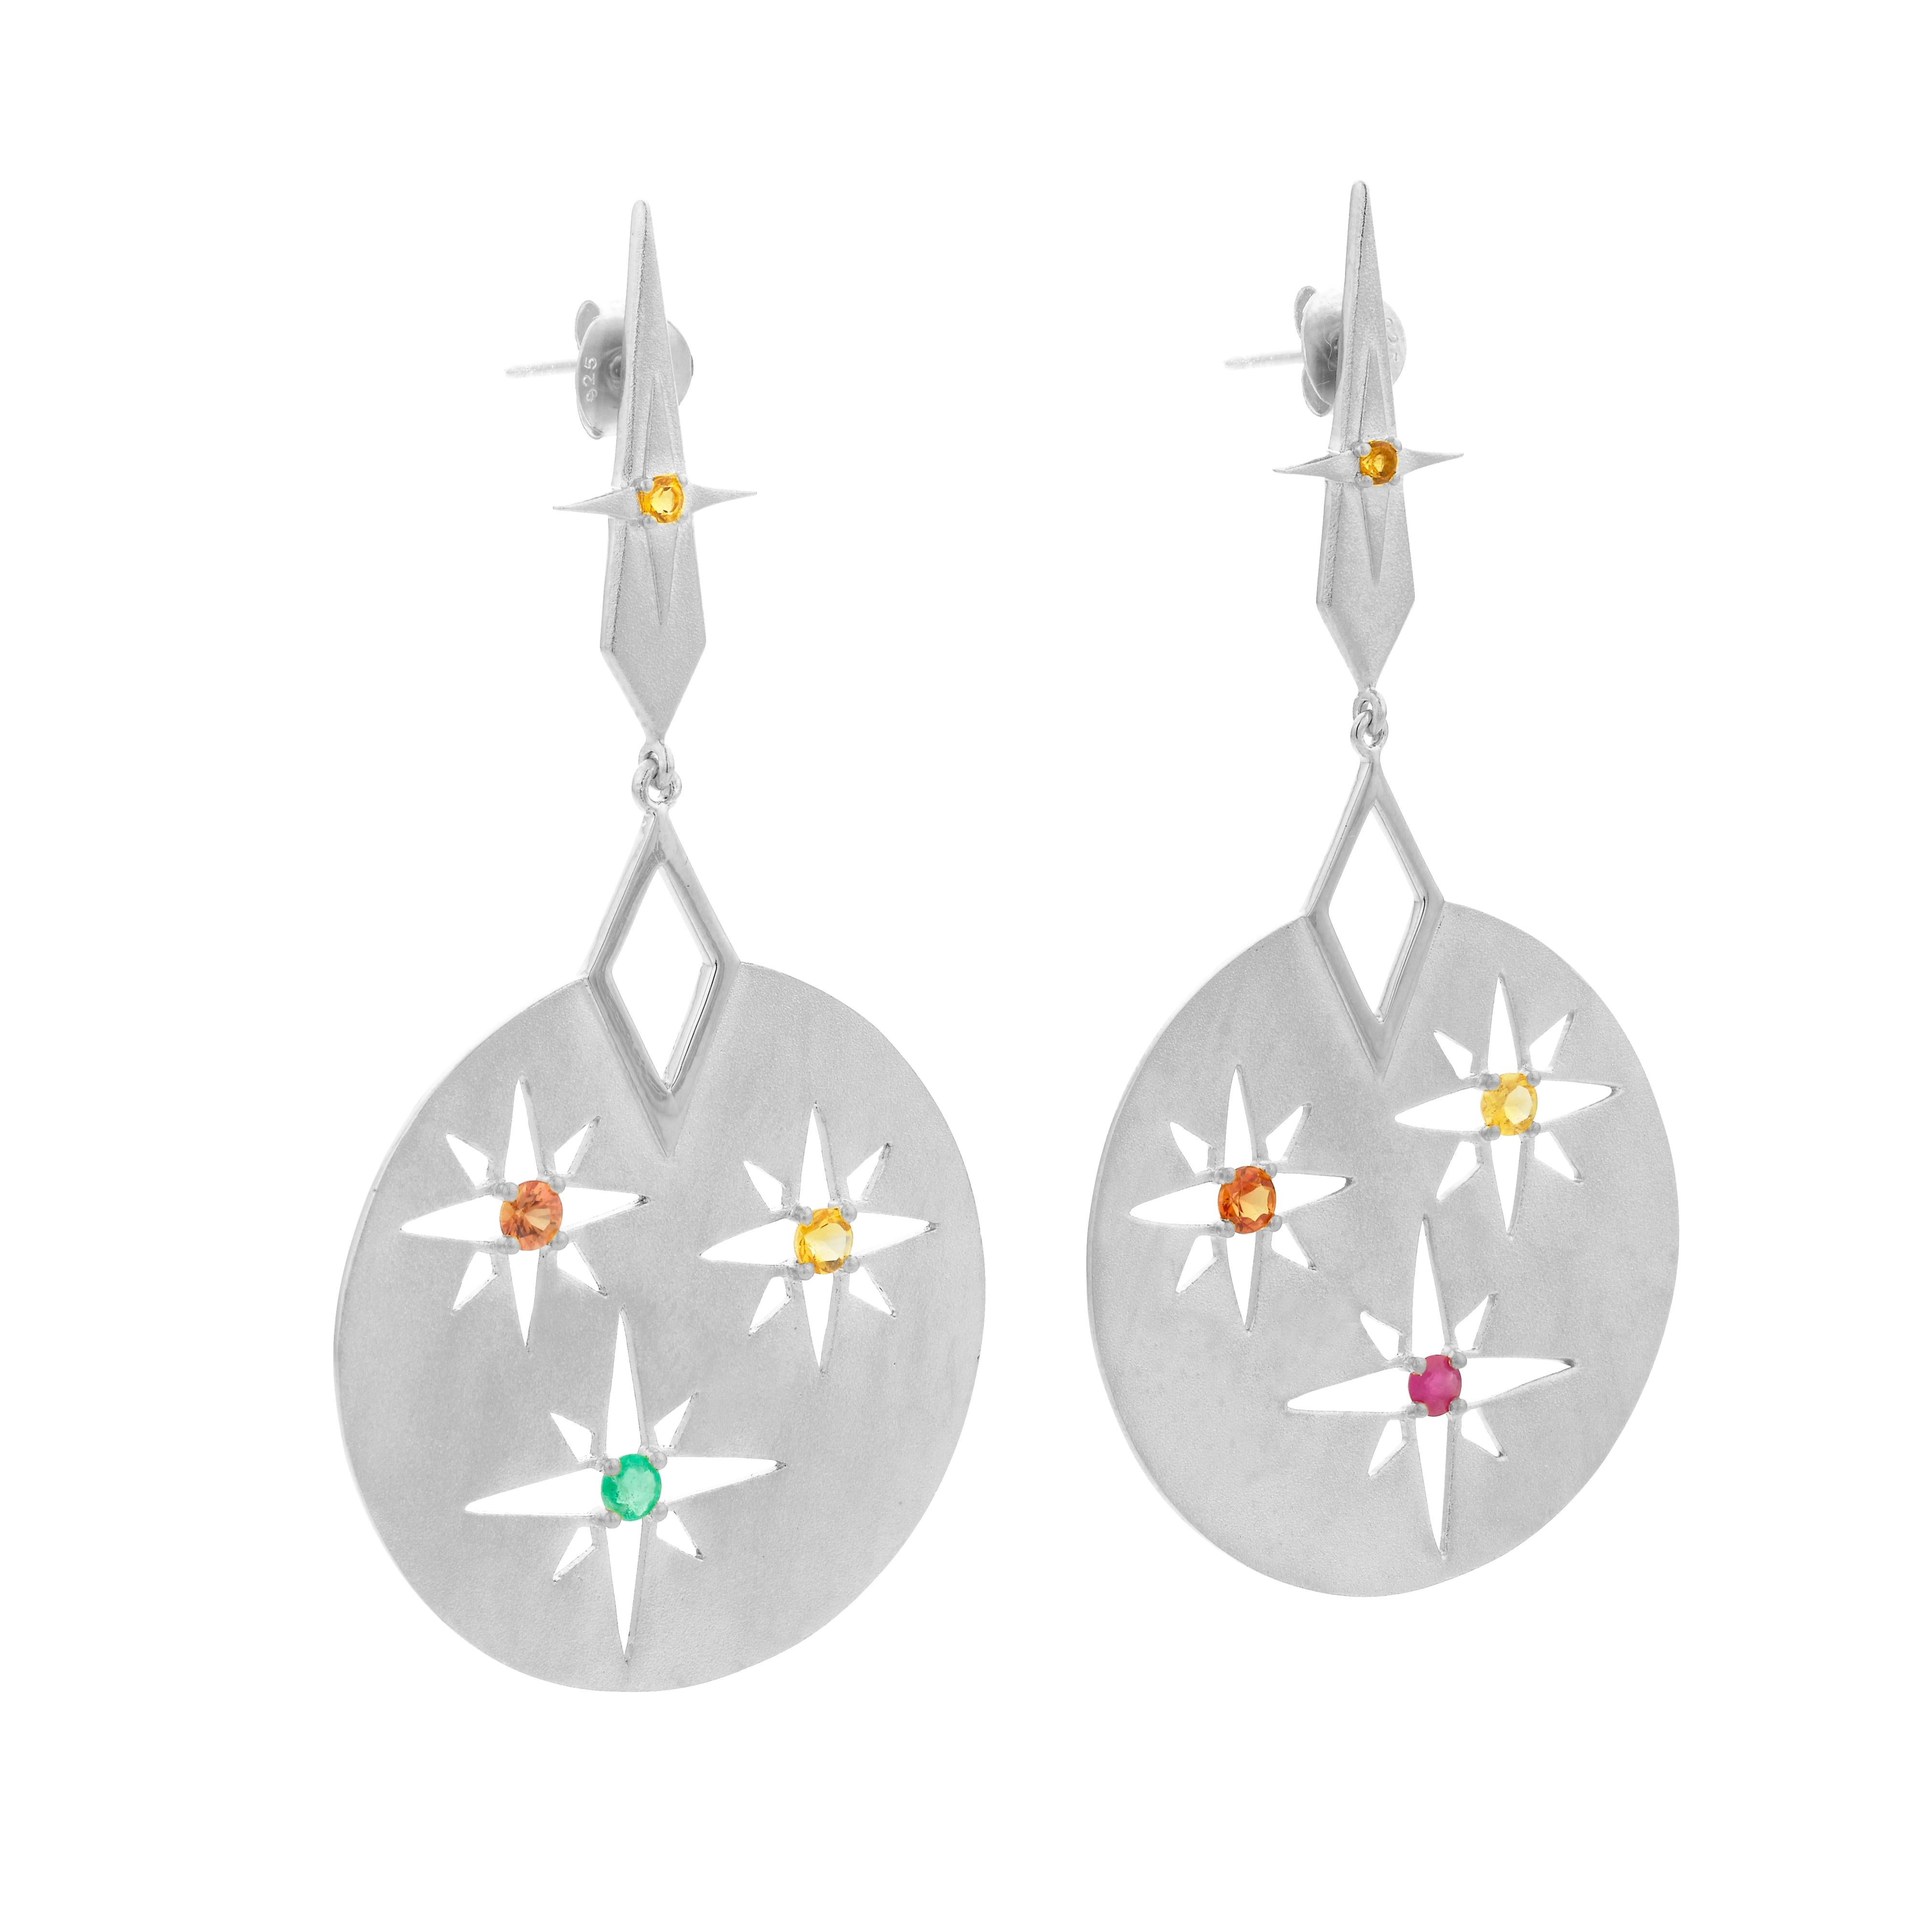 The Rising Sun earrings hold the spectrum of colours of the rising sun.

The stud set with Citrine sits high on the ear to reflect the sun at its highest point.

The elegant drop matte disk reveals the cut-out detailing of the sun with mismatched